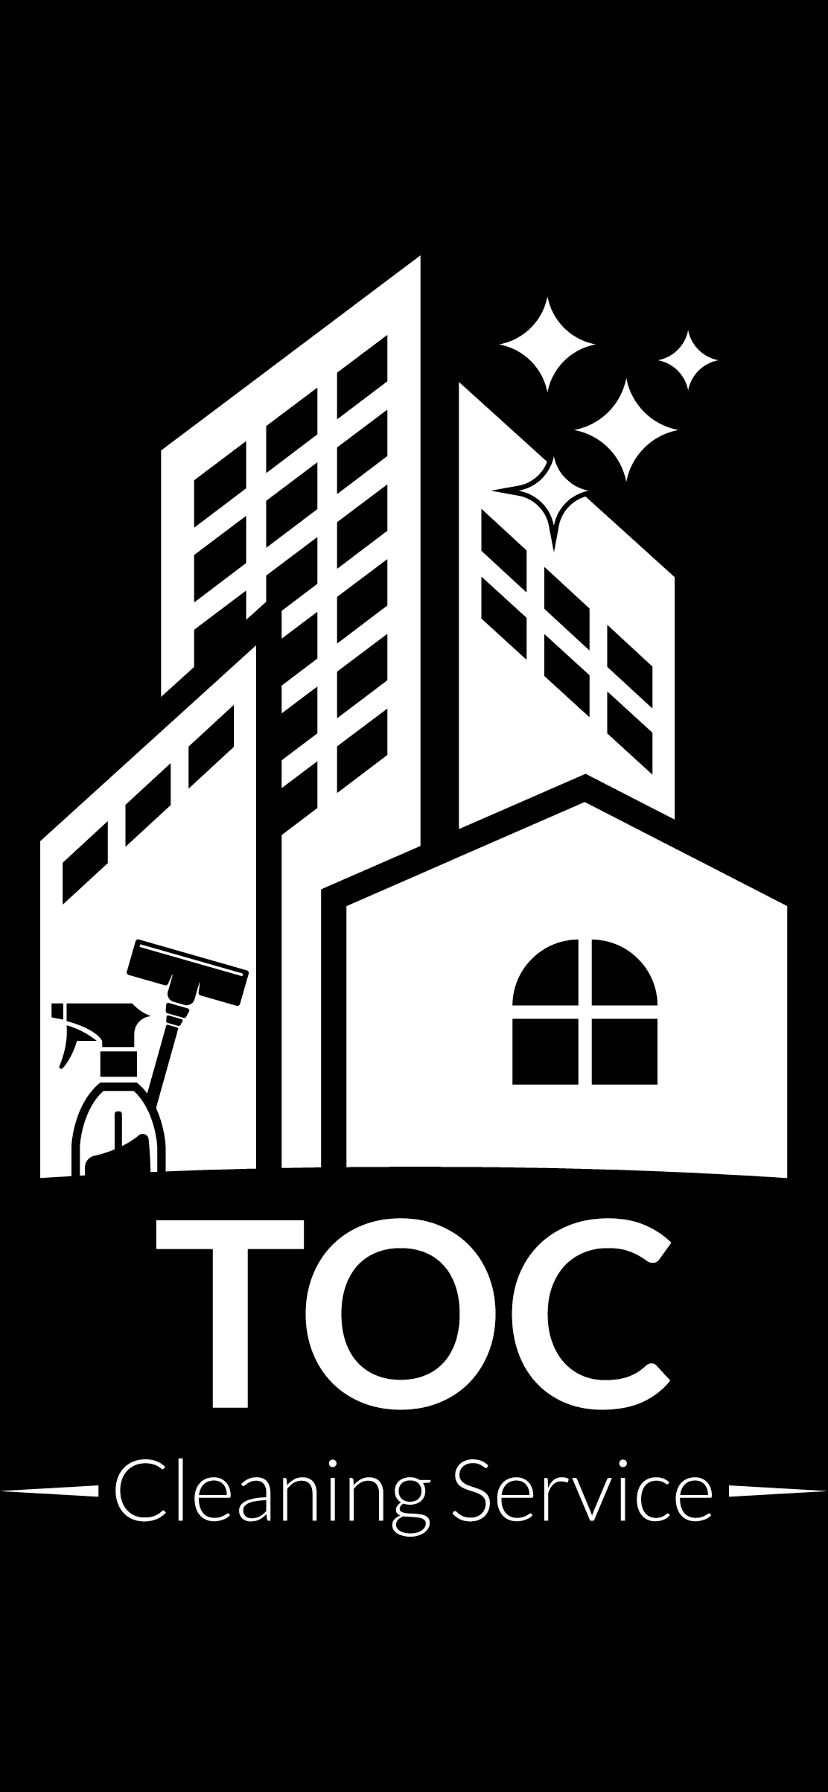 TOC Cleaning Service